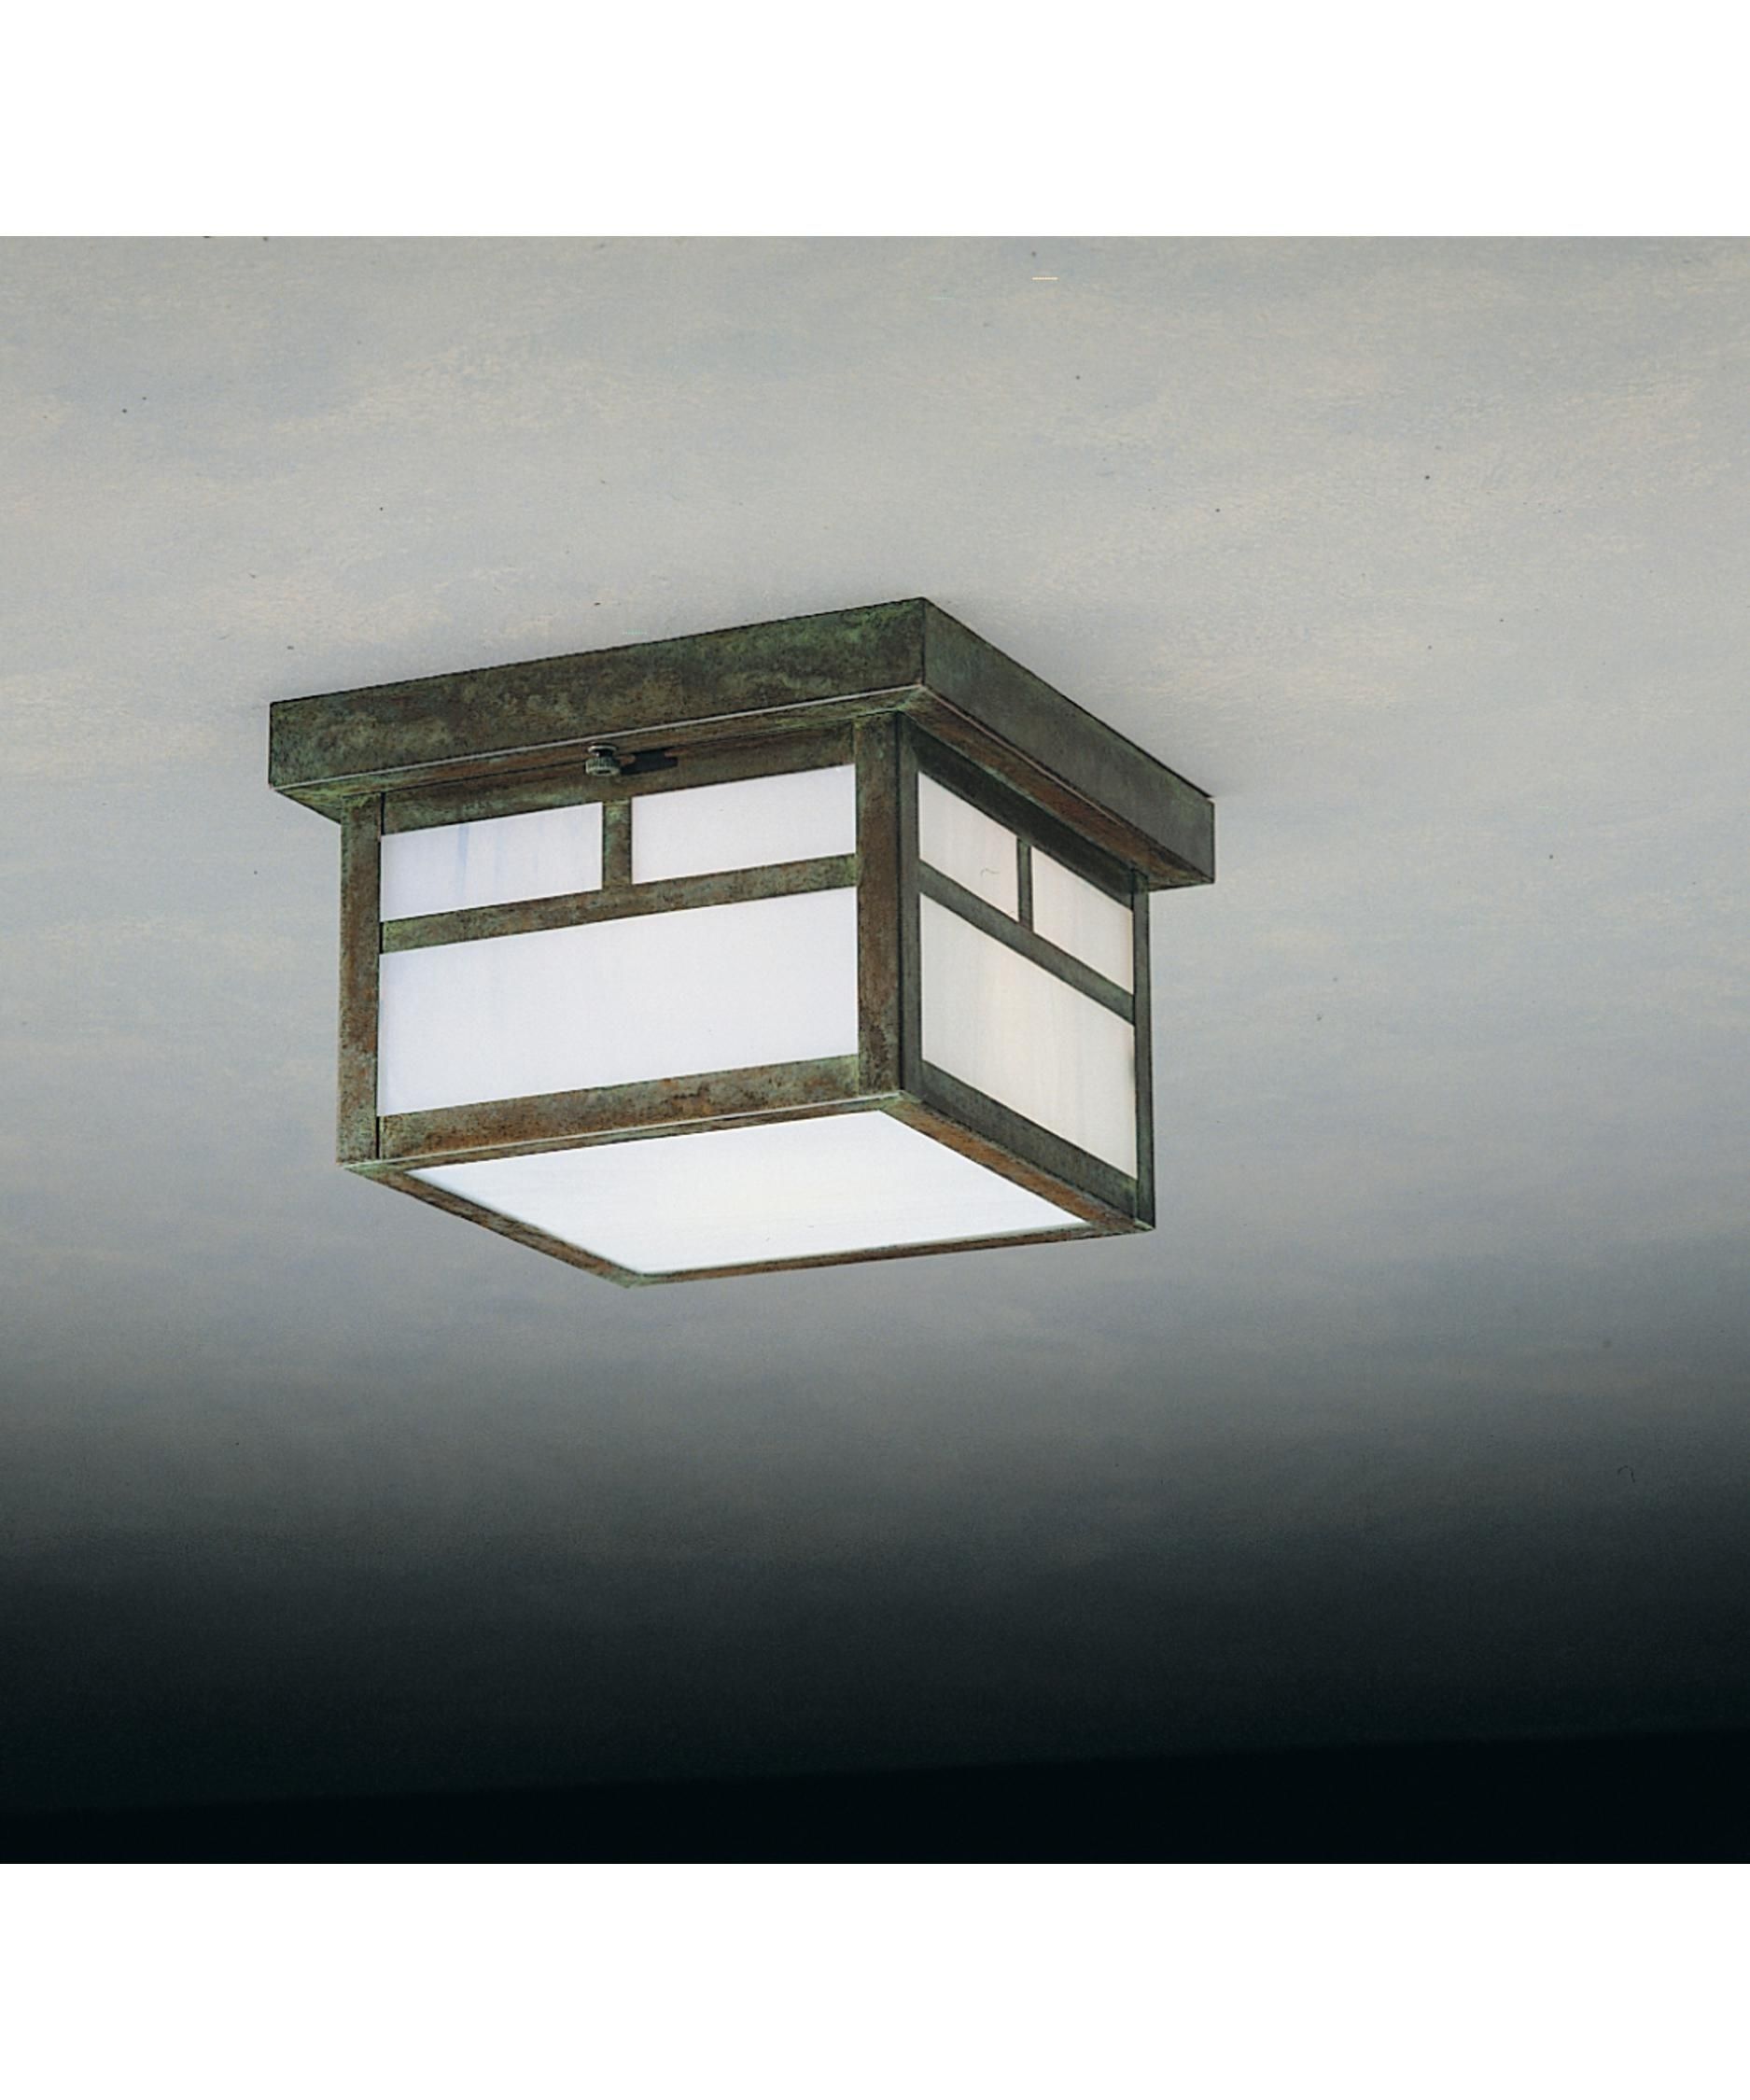 Arroyo Craftsman Mcm 8 Mission 8 Inch Wide 2 Light Outdoor Flush Inside Craftsman Outdoor Ceiling Lights (View 10 of 15)